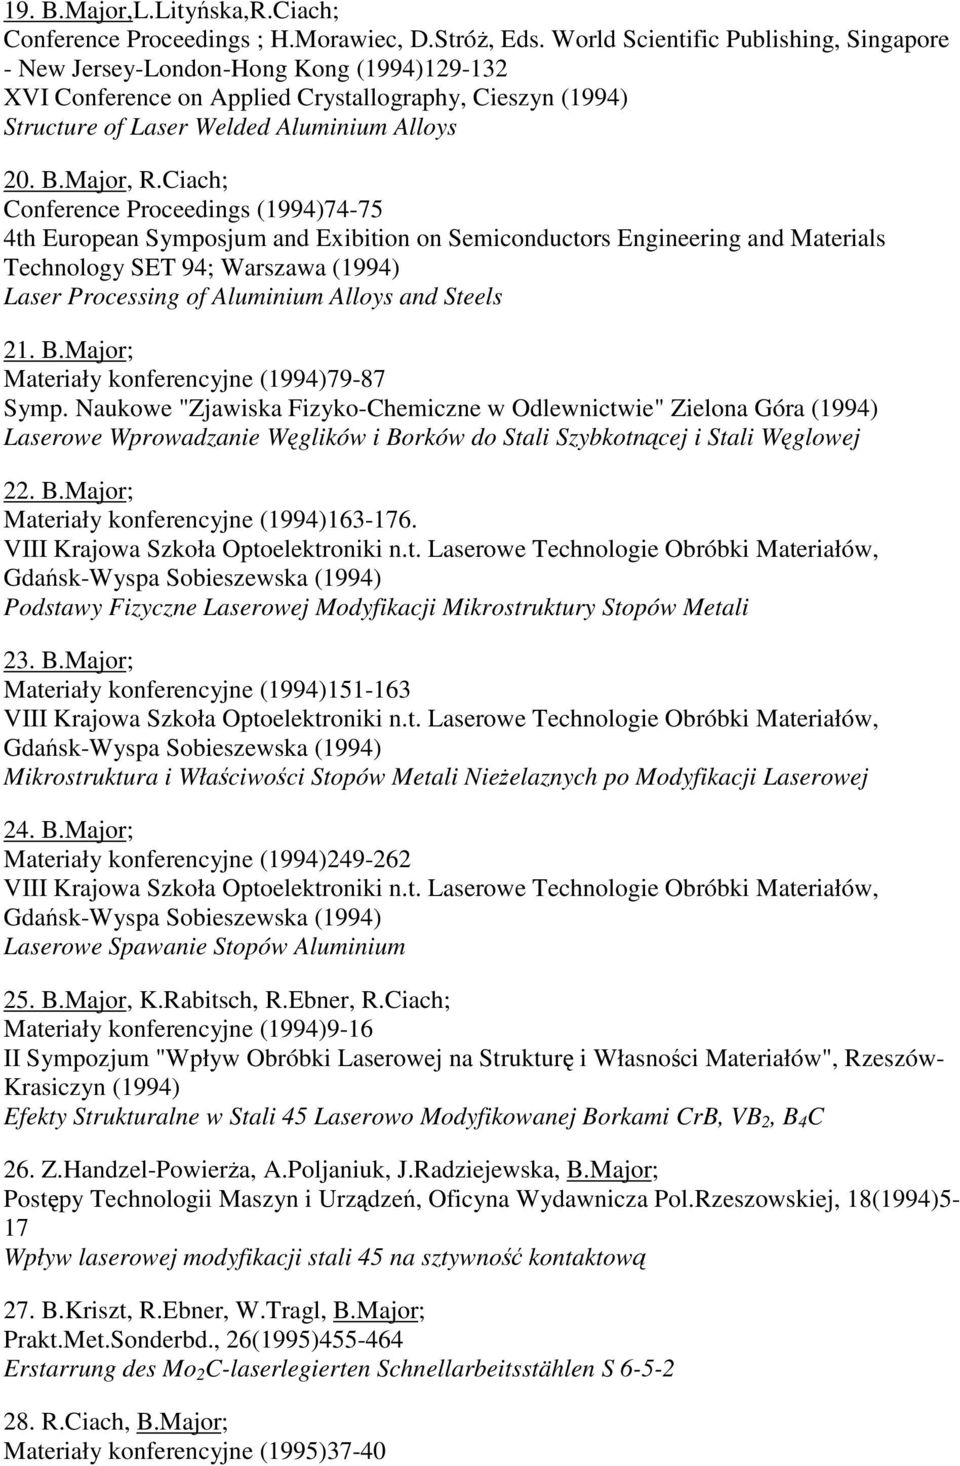 Ciach; Conference Proceedings (1994)74-75 4th European Symposjum and Exibition on Semiconductors Engineering and Materials Technology SET 94; Warszawa (1994) Laser Processing of Aluminium Alloys and